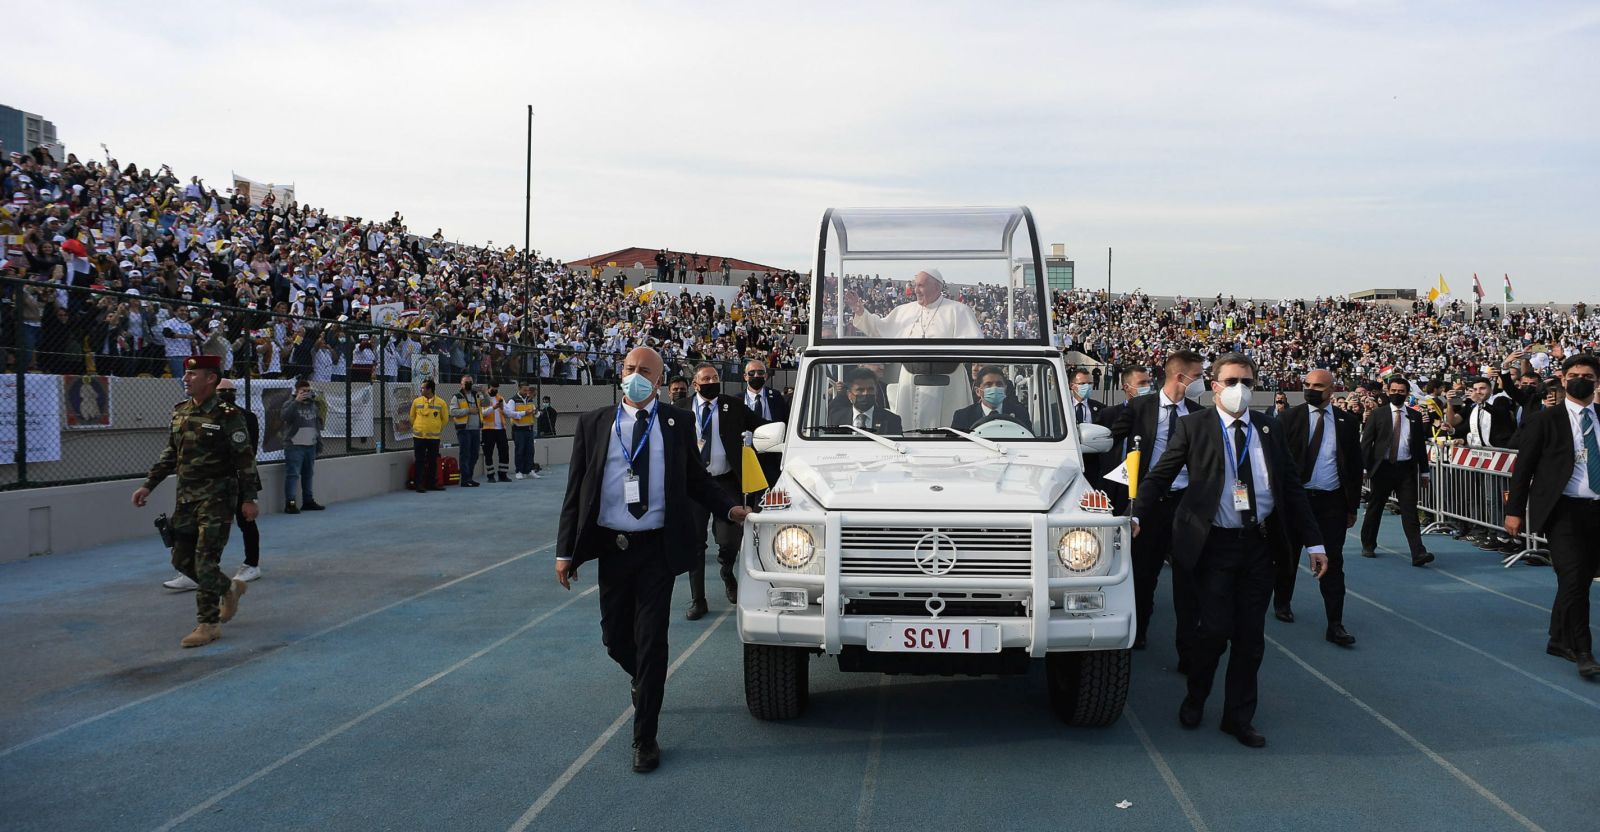 epa09059523 Pope Francis (C) ride the Papal Mobil as he arrives to celebrate the Holy Mass at the 'Franso Hariri' Stadium in Erbil, Iraq, 07 March 2021. Pope Francis began on 05 March a three-day official visit in Iraq, the first papal visit to this country affected throughout the years by war, insecurity and lately COVID-19 Coronavirus pandemic.  EPA/VATICAN MEDIA HANDOUT  HANDOUT EDITORIAL USE ONLY/NO SALES